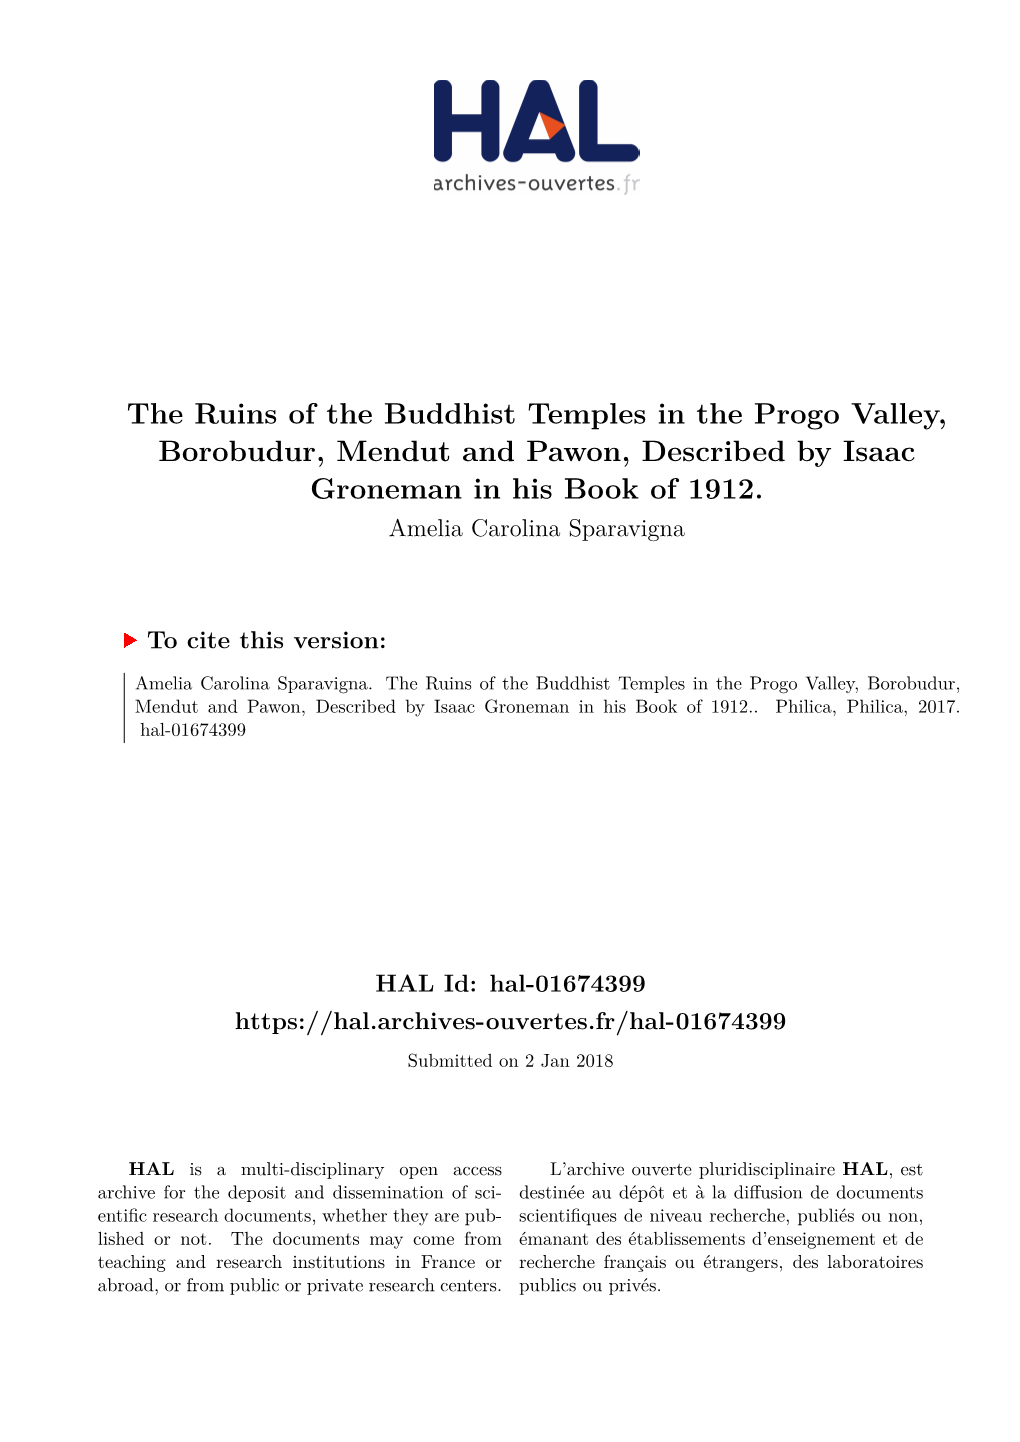 The Ruins of the Buddhist Temples in the Progo Valley, Borobudur, Mendut and Pawon, Described by Isaac Groneman in His Book of 1912